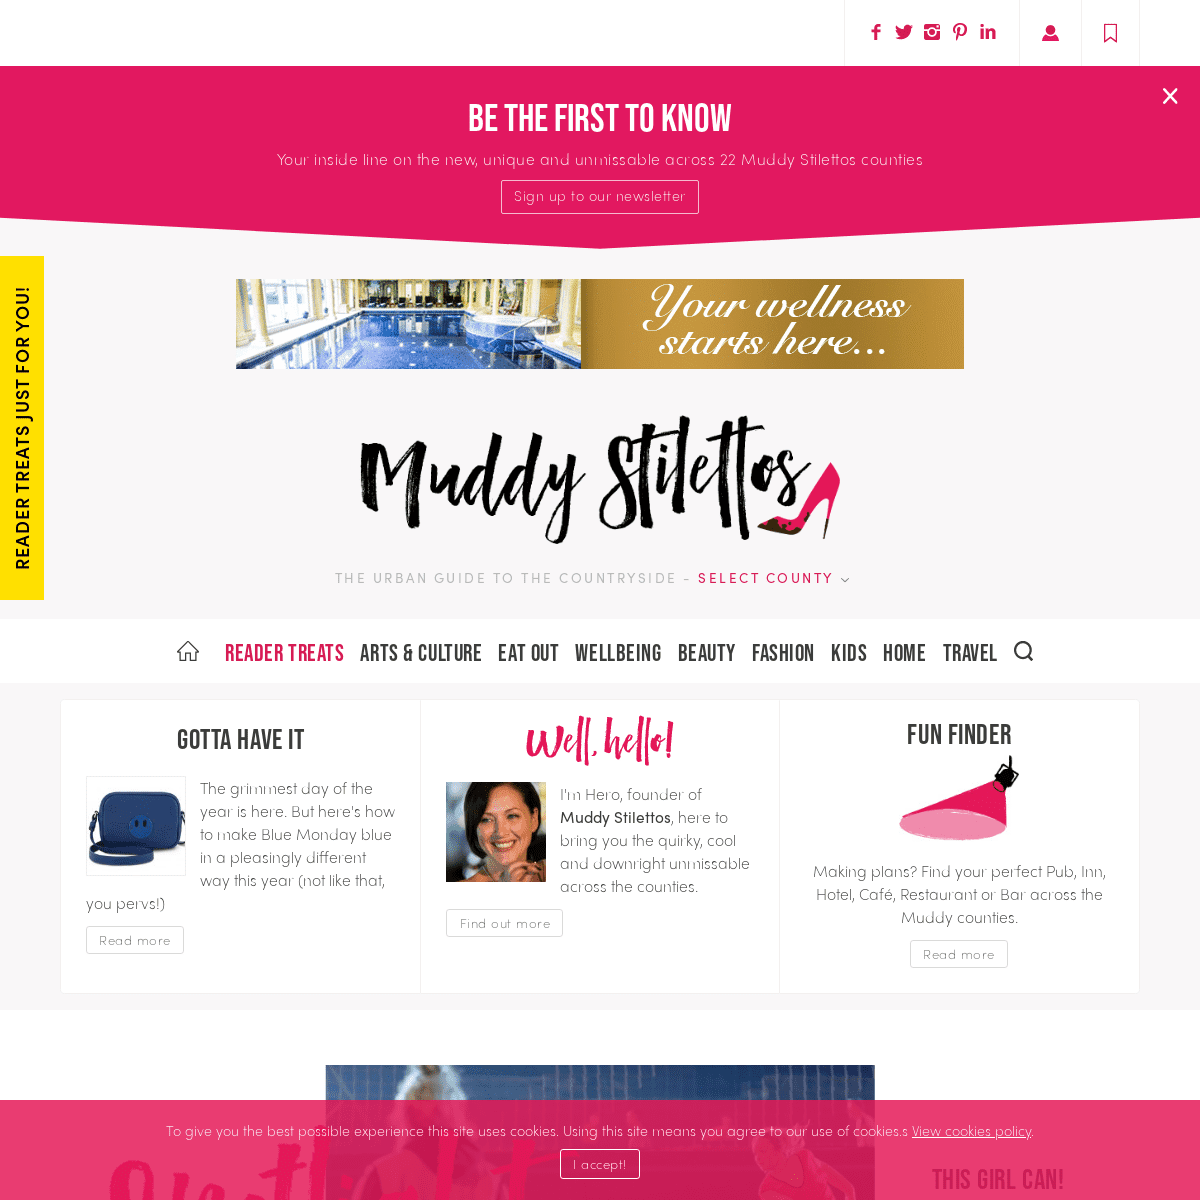 A complete backup of muddystilettos.co.uk